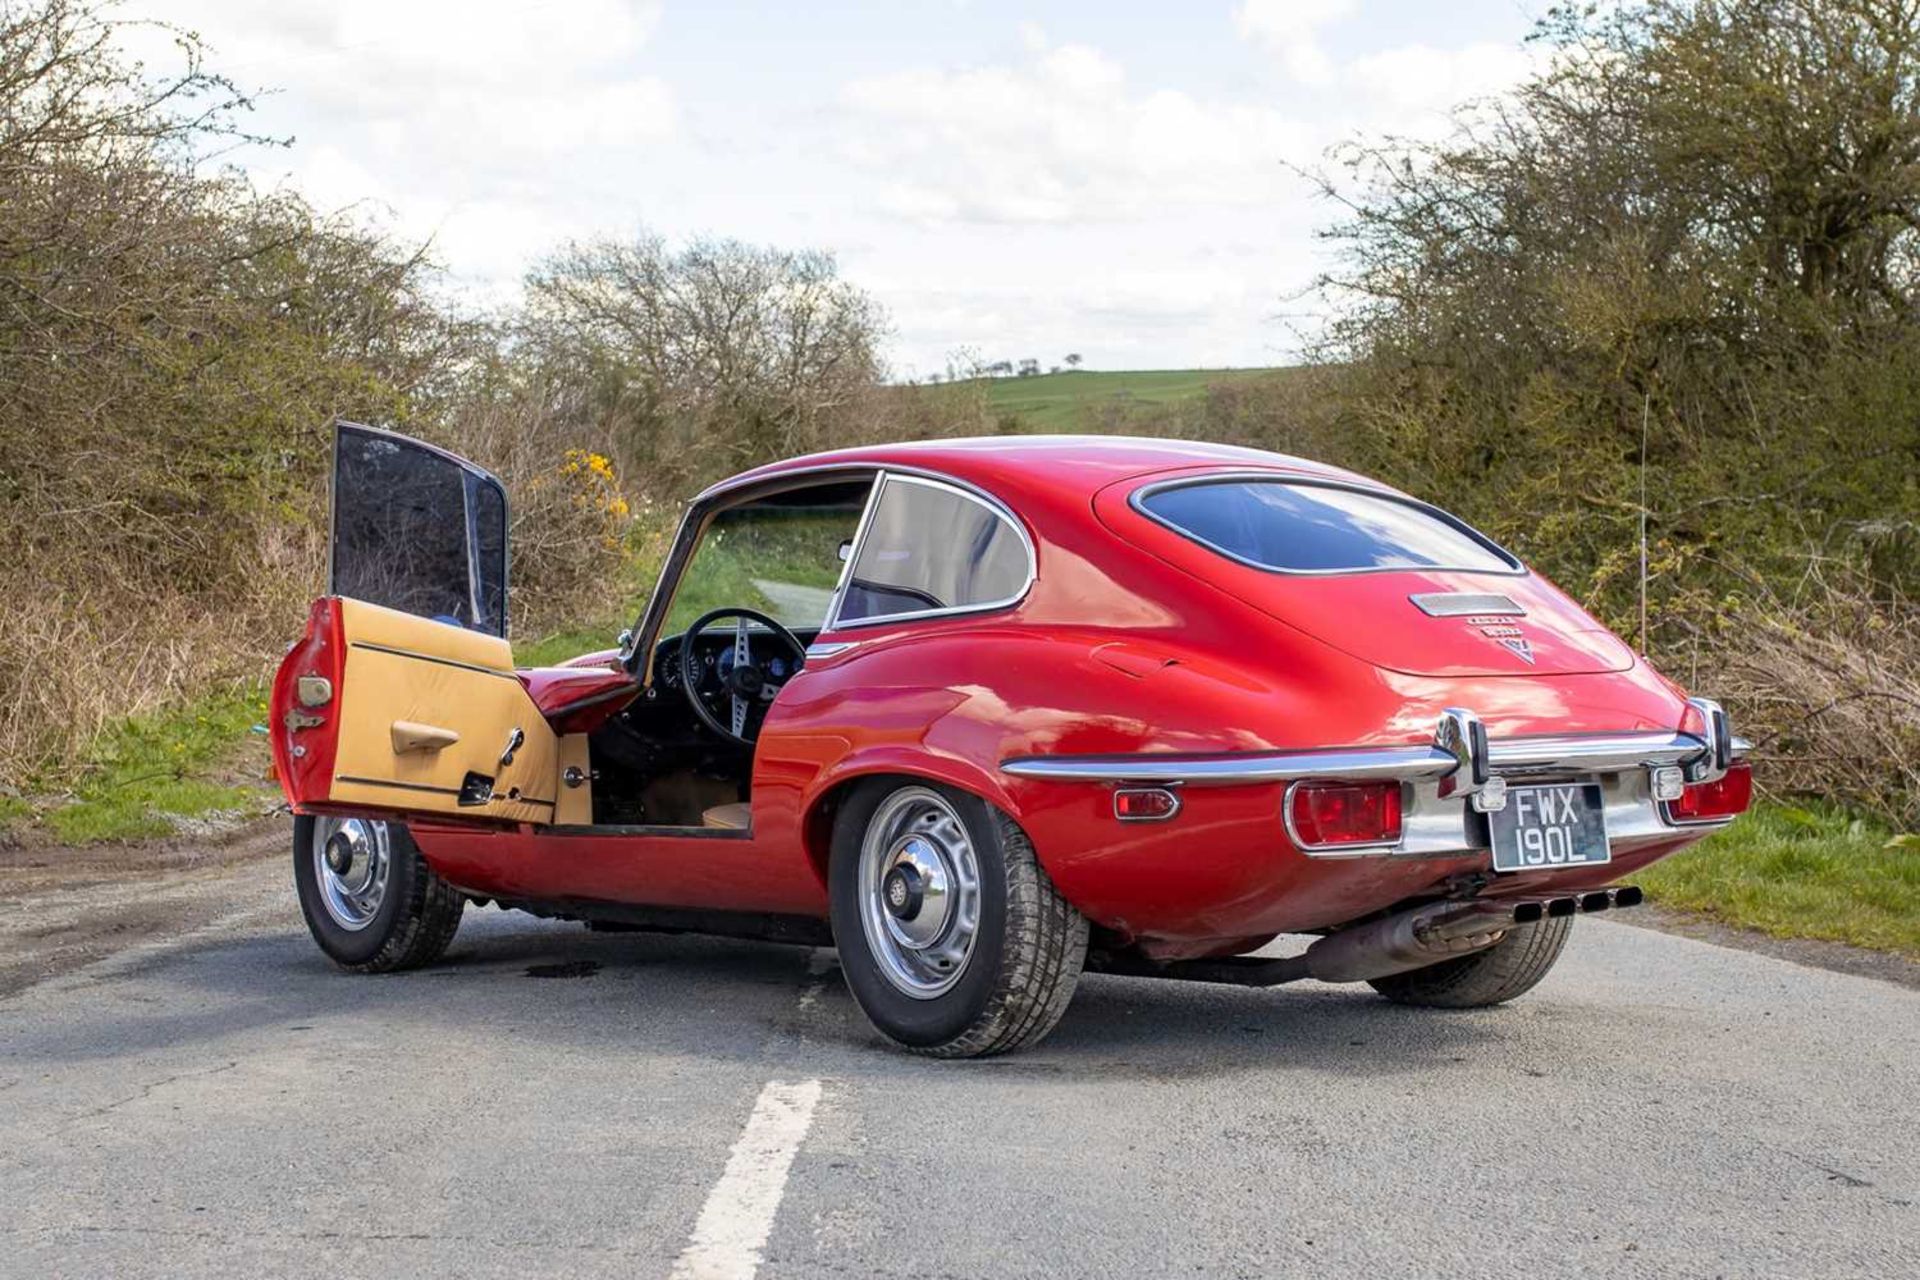 1973 Jaguar E-Type Coupe 5.3 V12 Three owners from new - Image 54 of 79